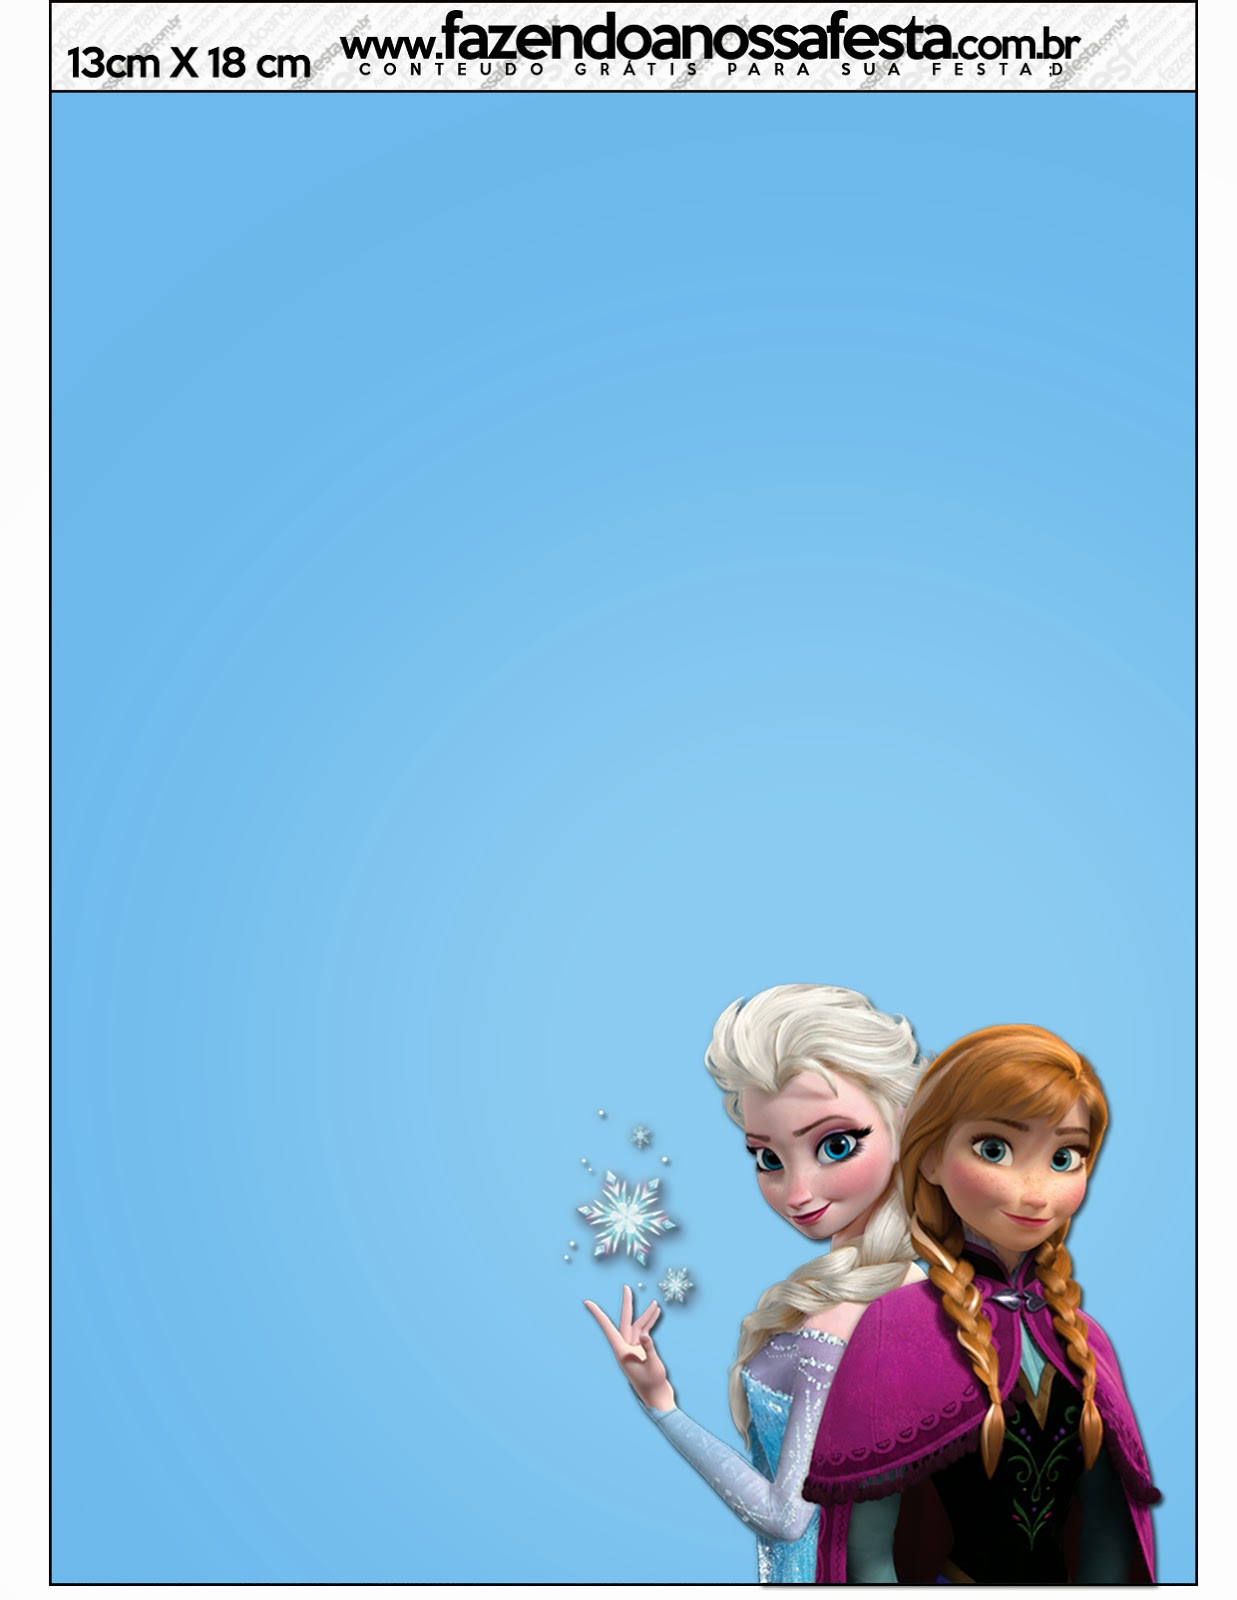 Frozen Invite Printable Frozen Free Printable Cards or Party Invitations Oh My